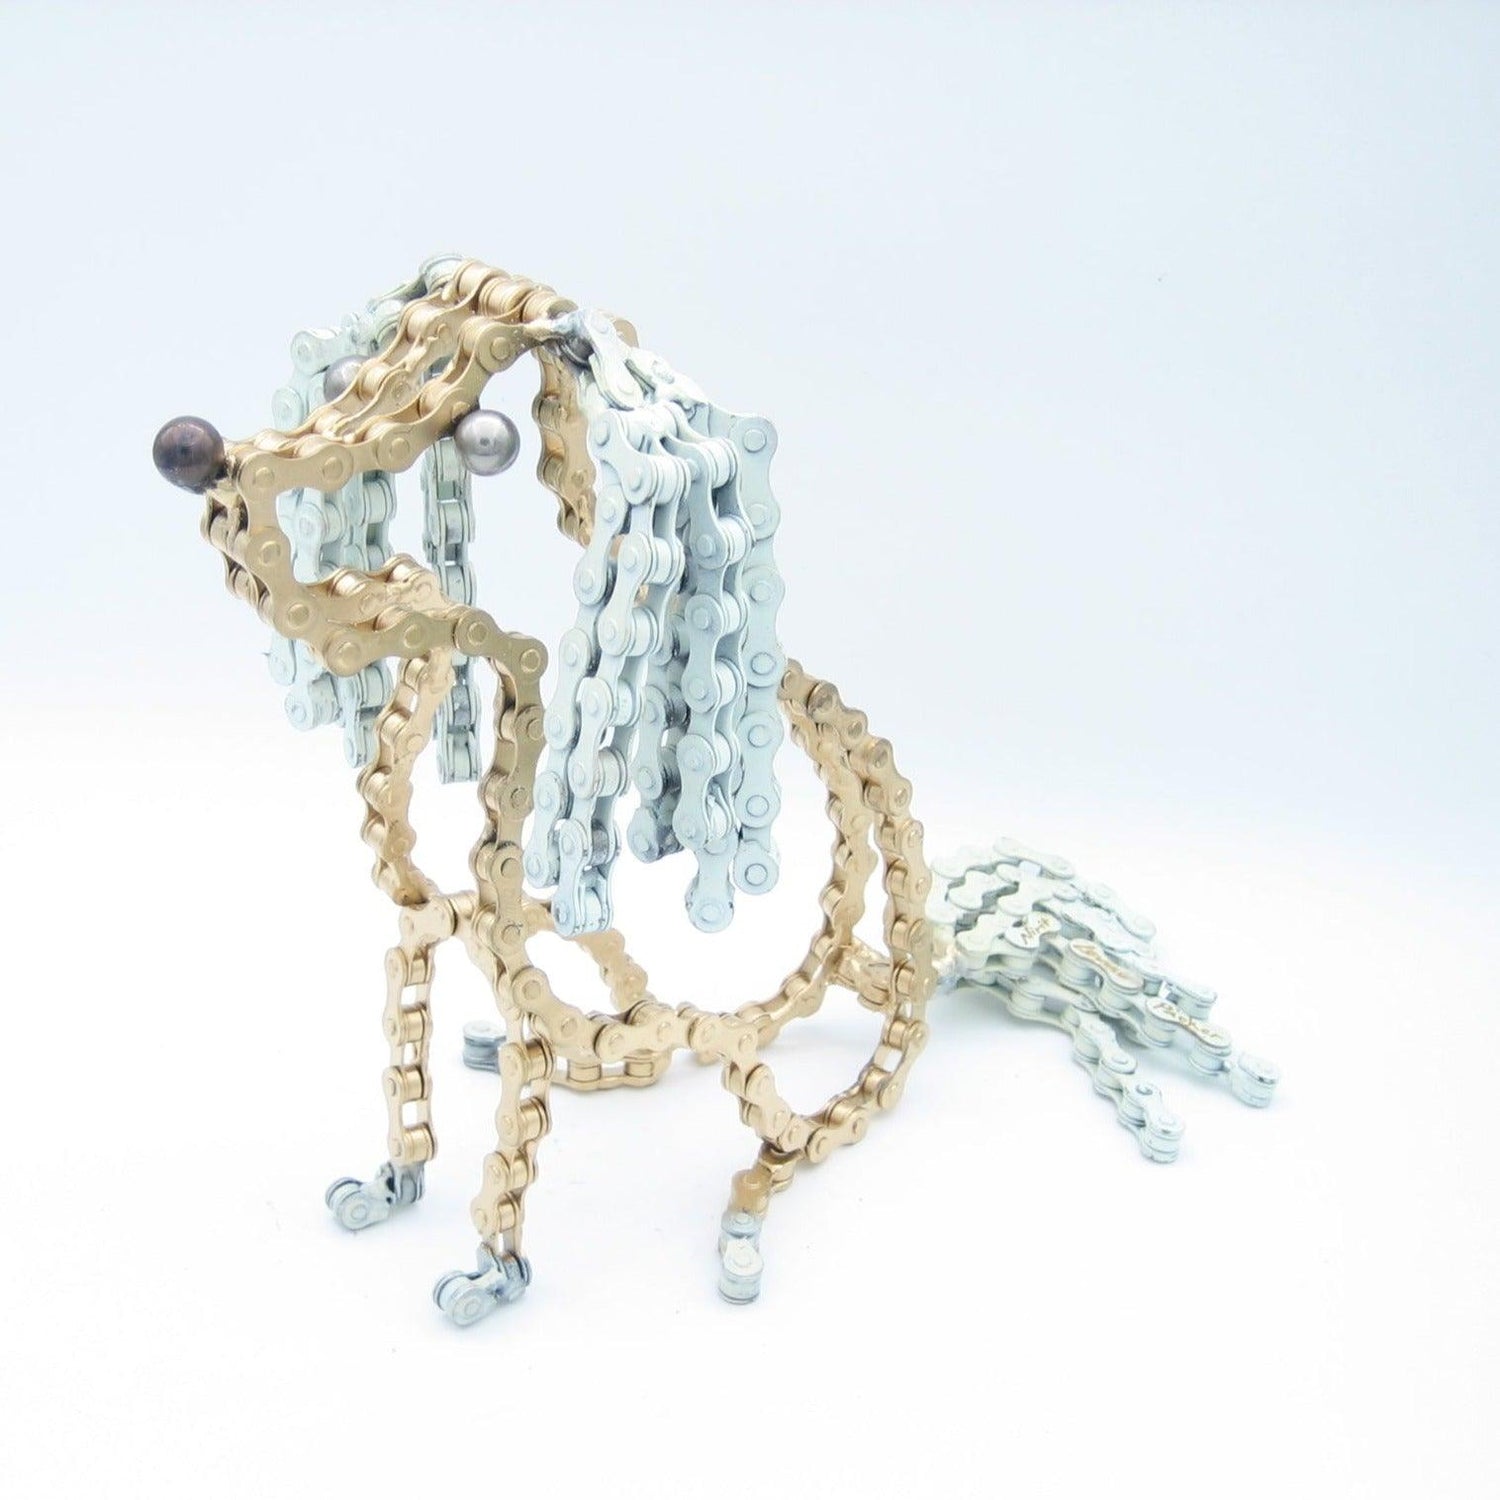 Cavalier King Charles Spaniel Sculpture (Max) | UNCHAINED by NIRIT LEVAV PACKER